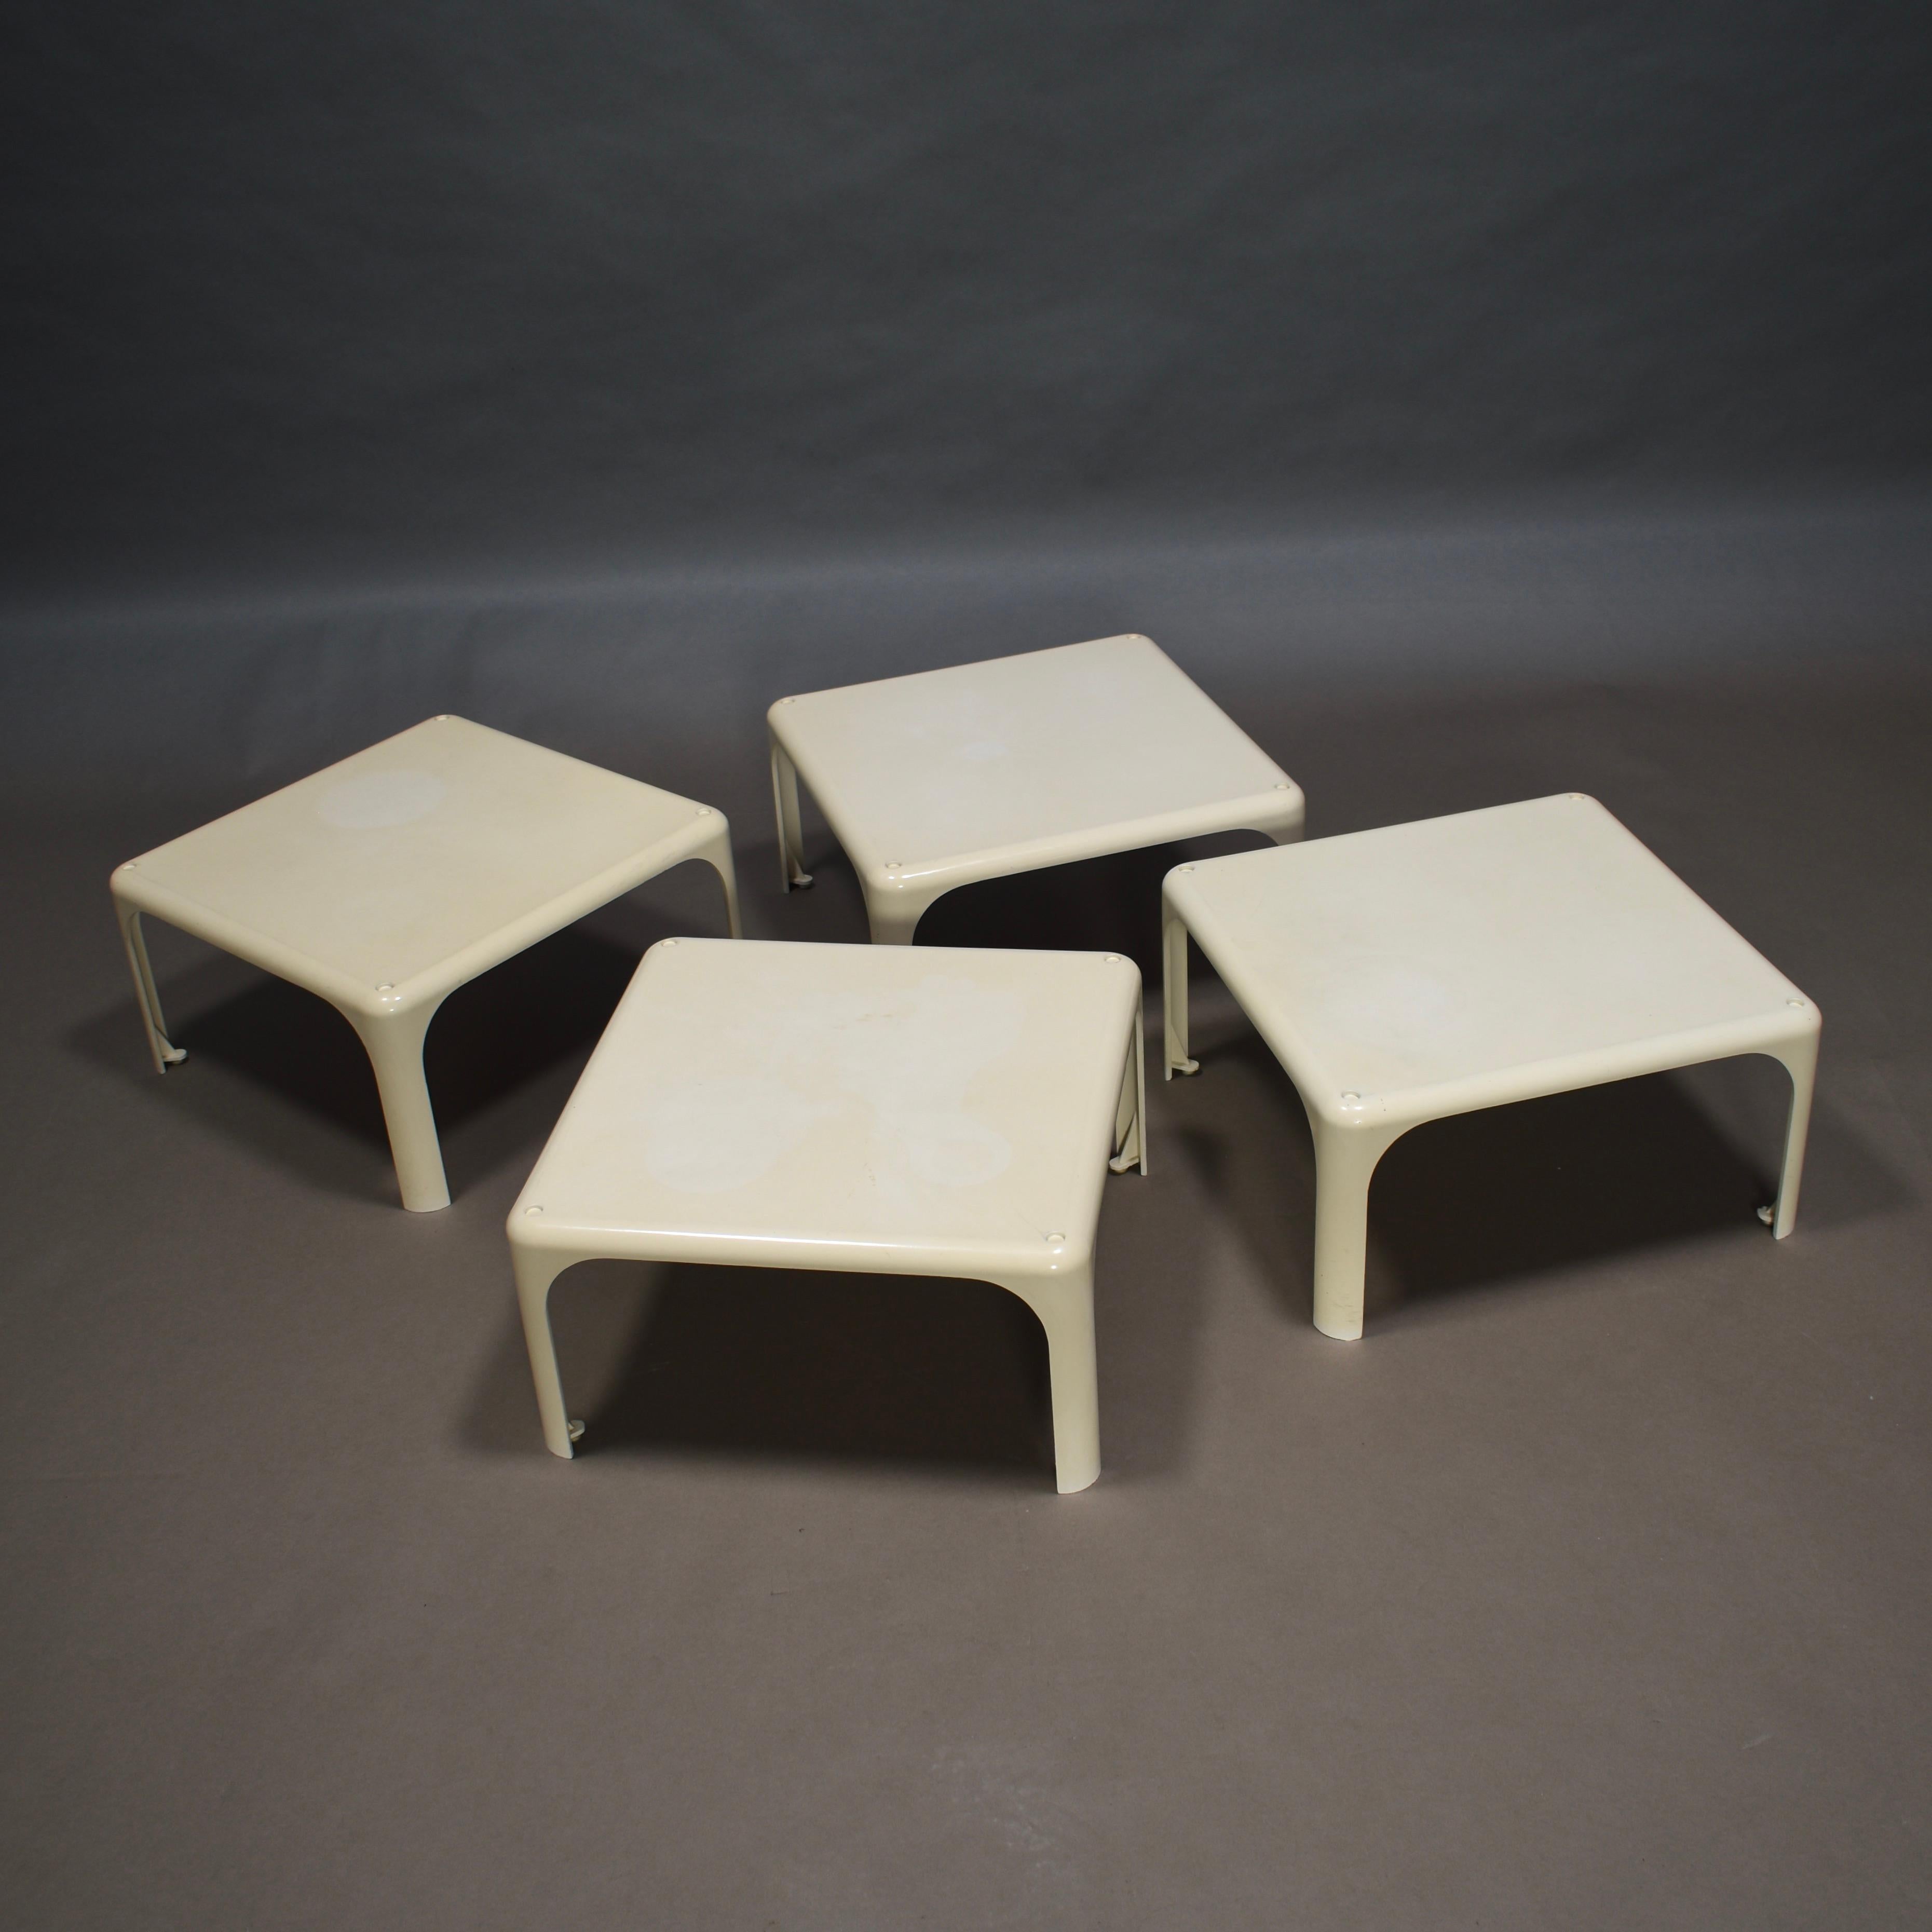 Set of four Demetrio 45 stackable side tables by Vico Magistretti for Artemide, Italy, circa 1964.

Designer: Vico Magistretti
Manufacturer: Artemide
Country: Italy
Model: Demetrio 45
Design period: 1964
Date of manufacturing: 1960-1970
Size